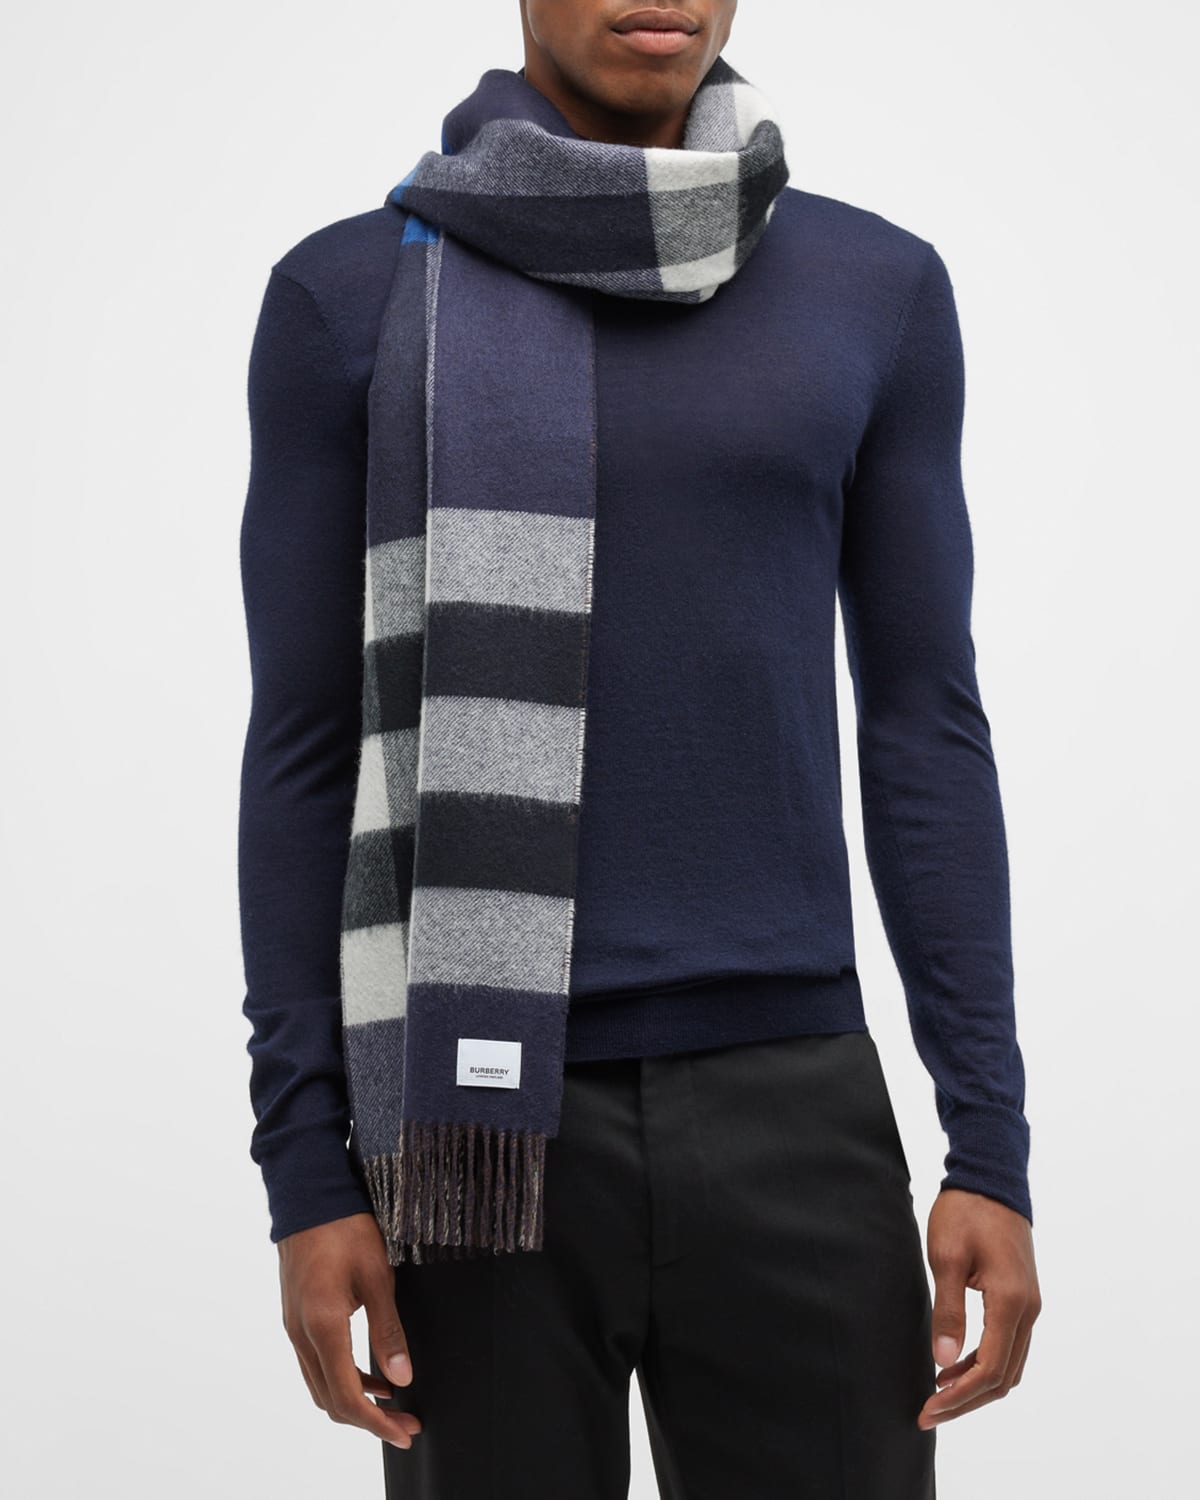 Burberry Men's Half Mega Double-Sided Cashmere Scarf